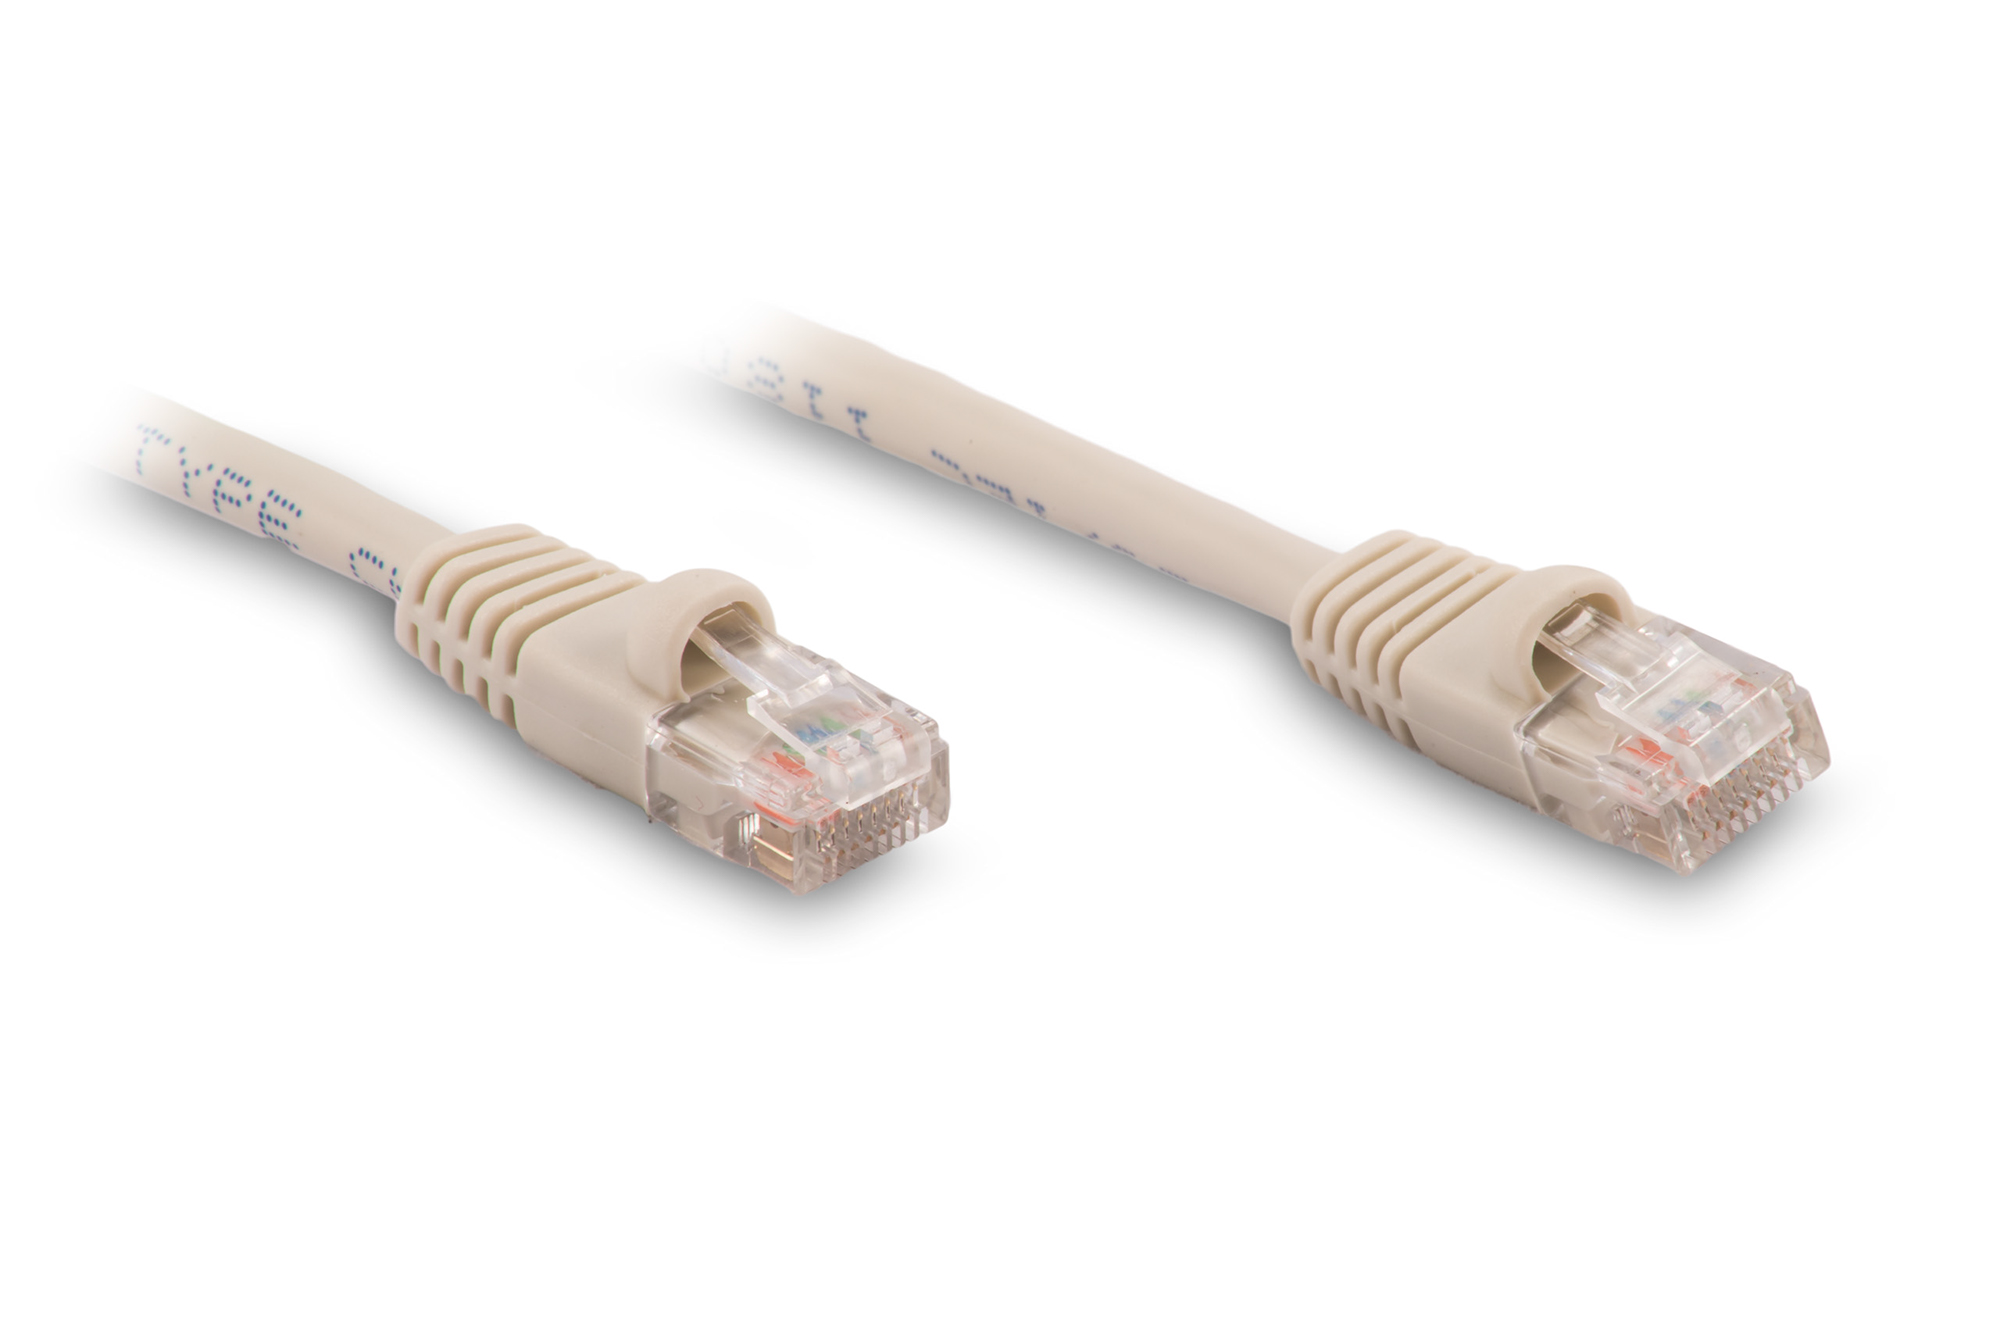 5ft Cat5e Ethernet Patch Cable - Gray Color - Snagless Boot, Stranded, RJ45, 350Mhz, 24AWG